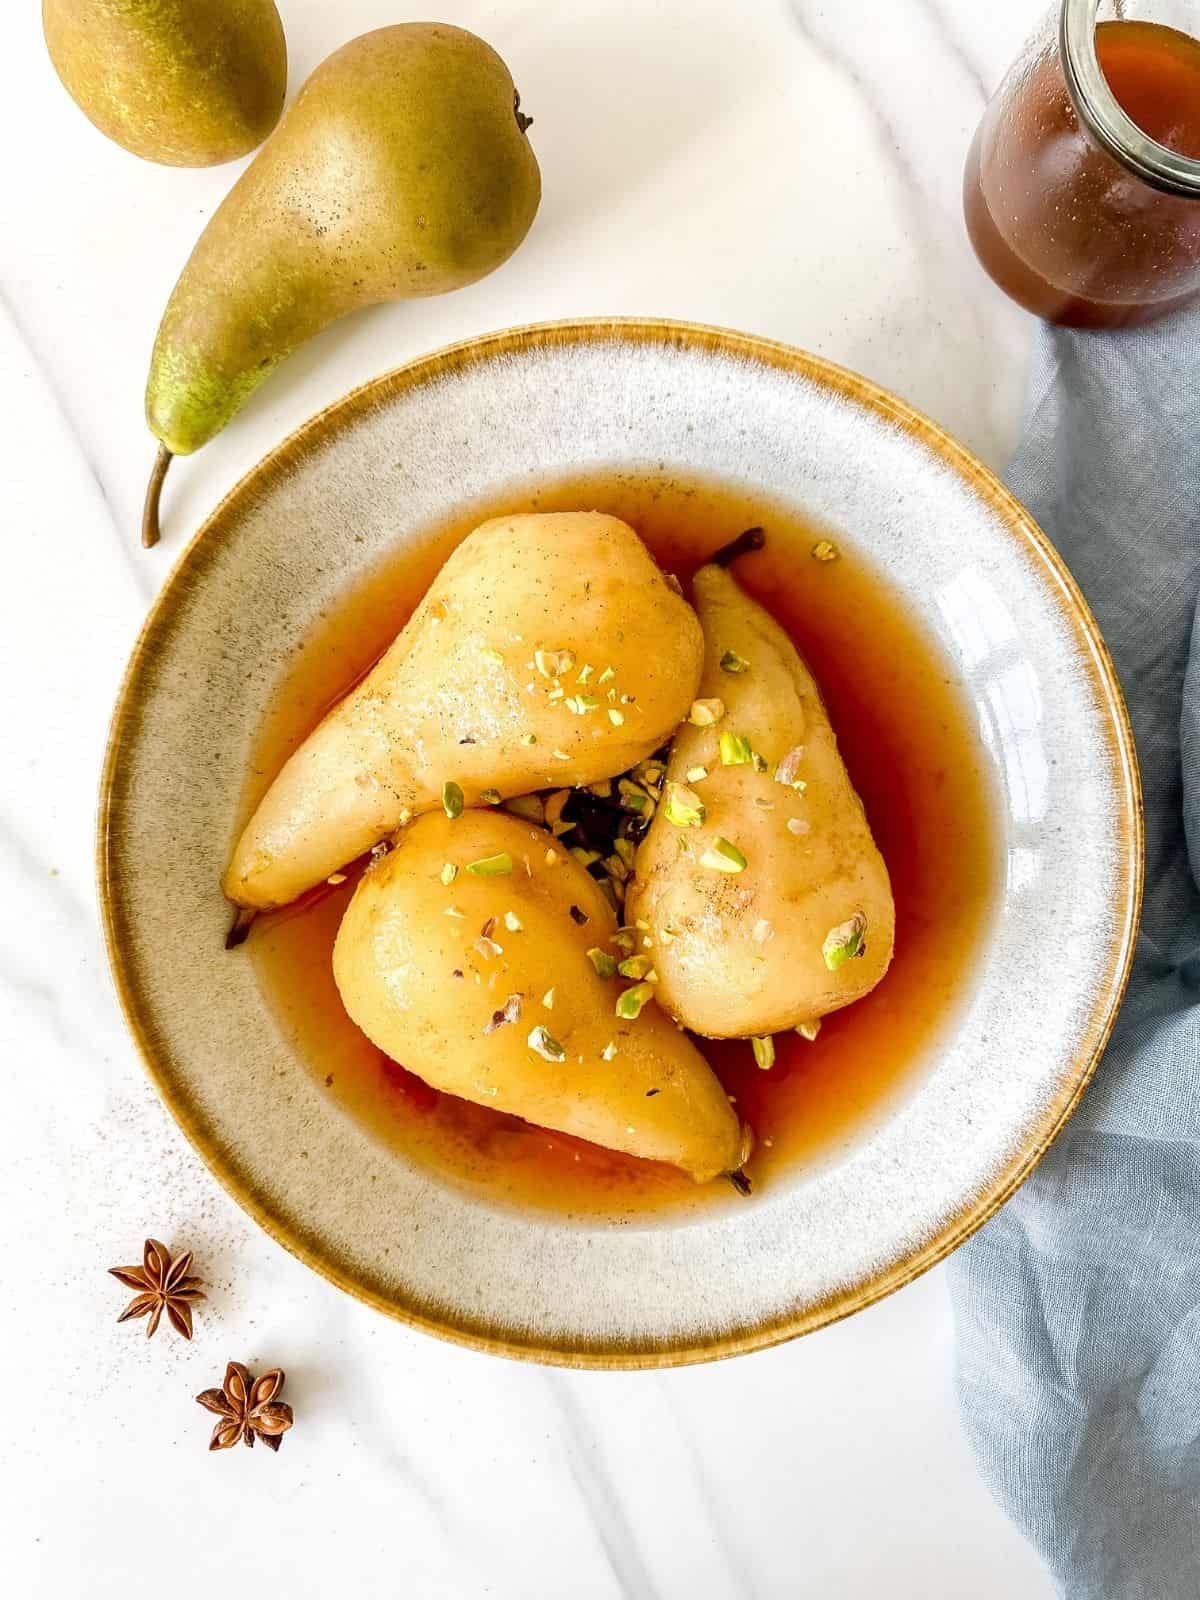 spiced poached pears in a grey bowl with a brown rim.